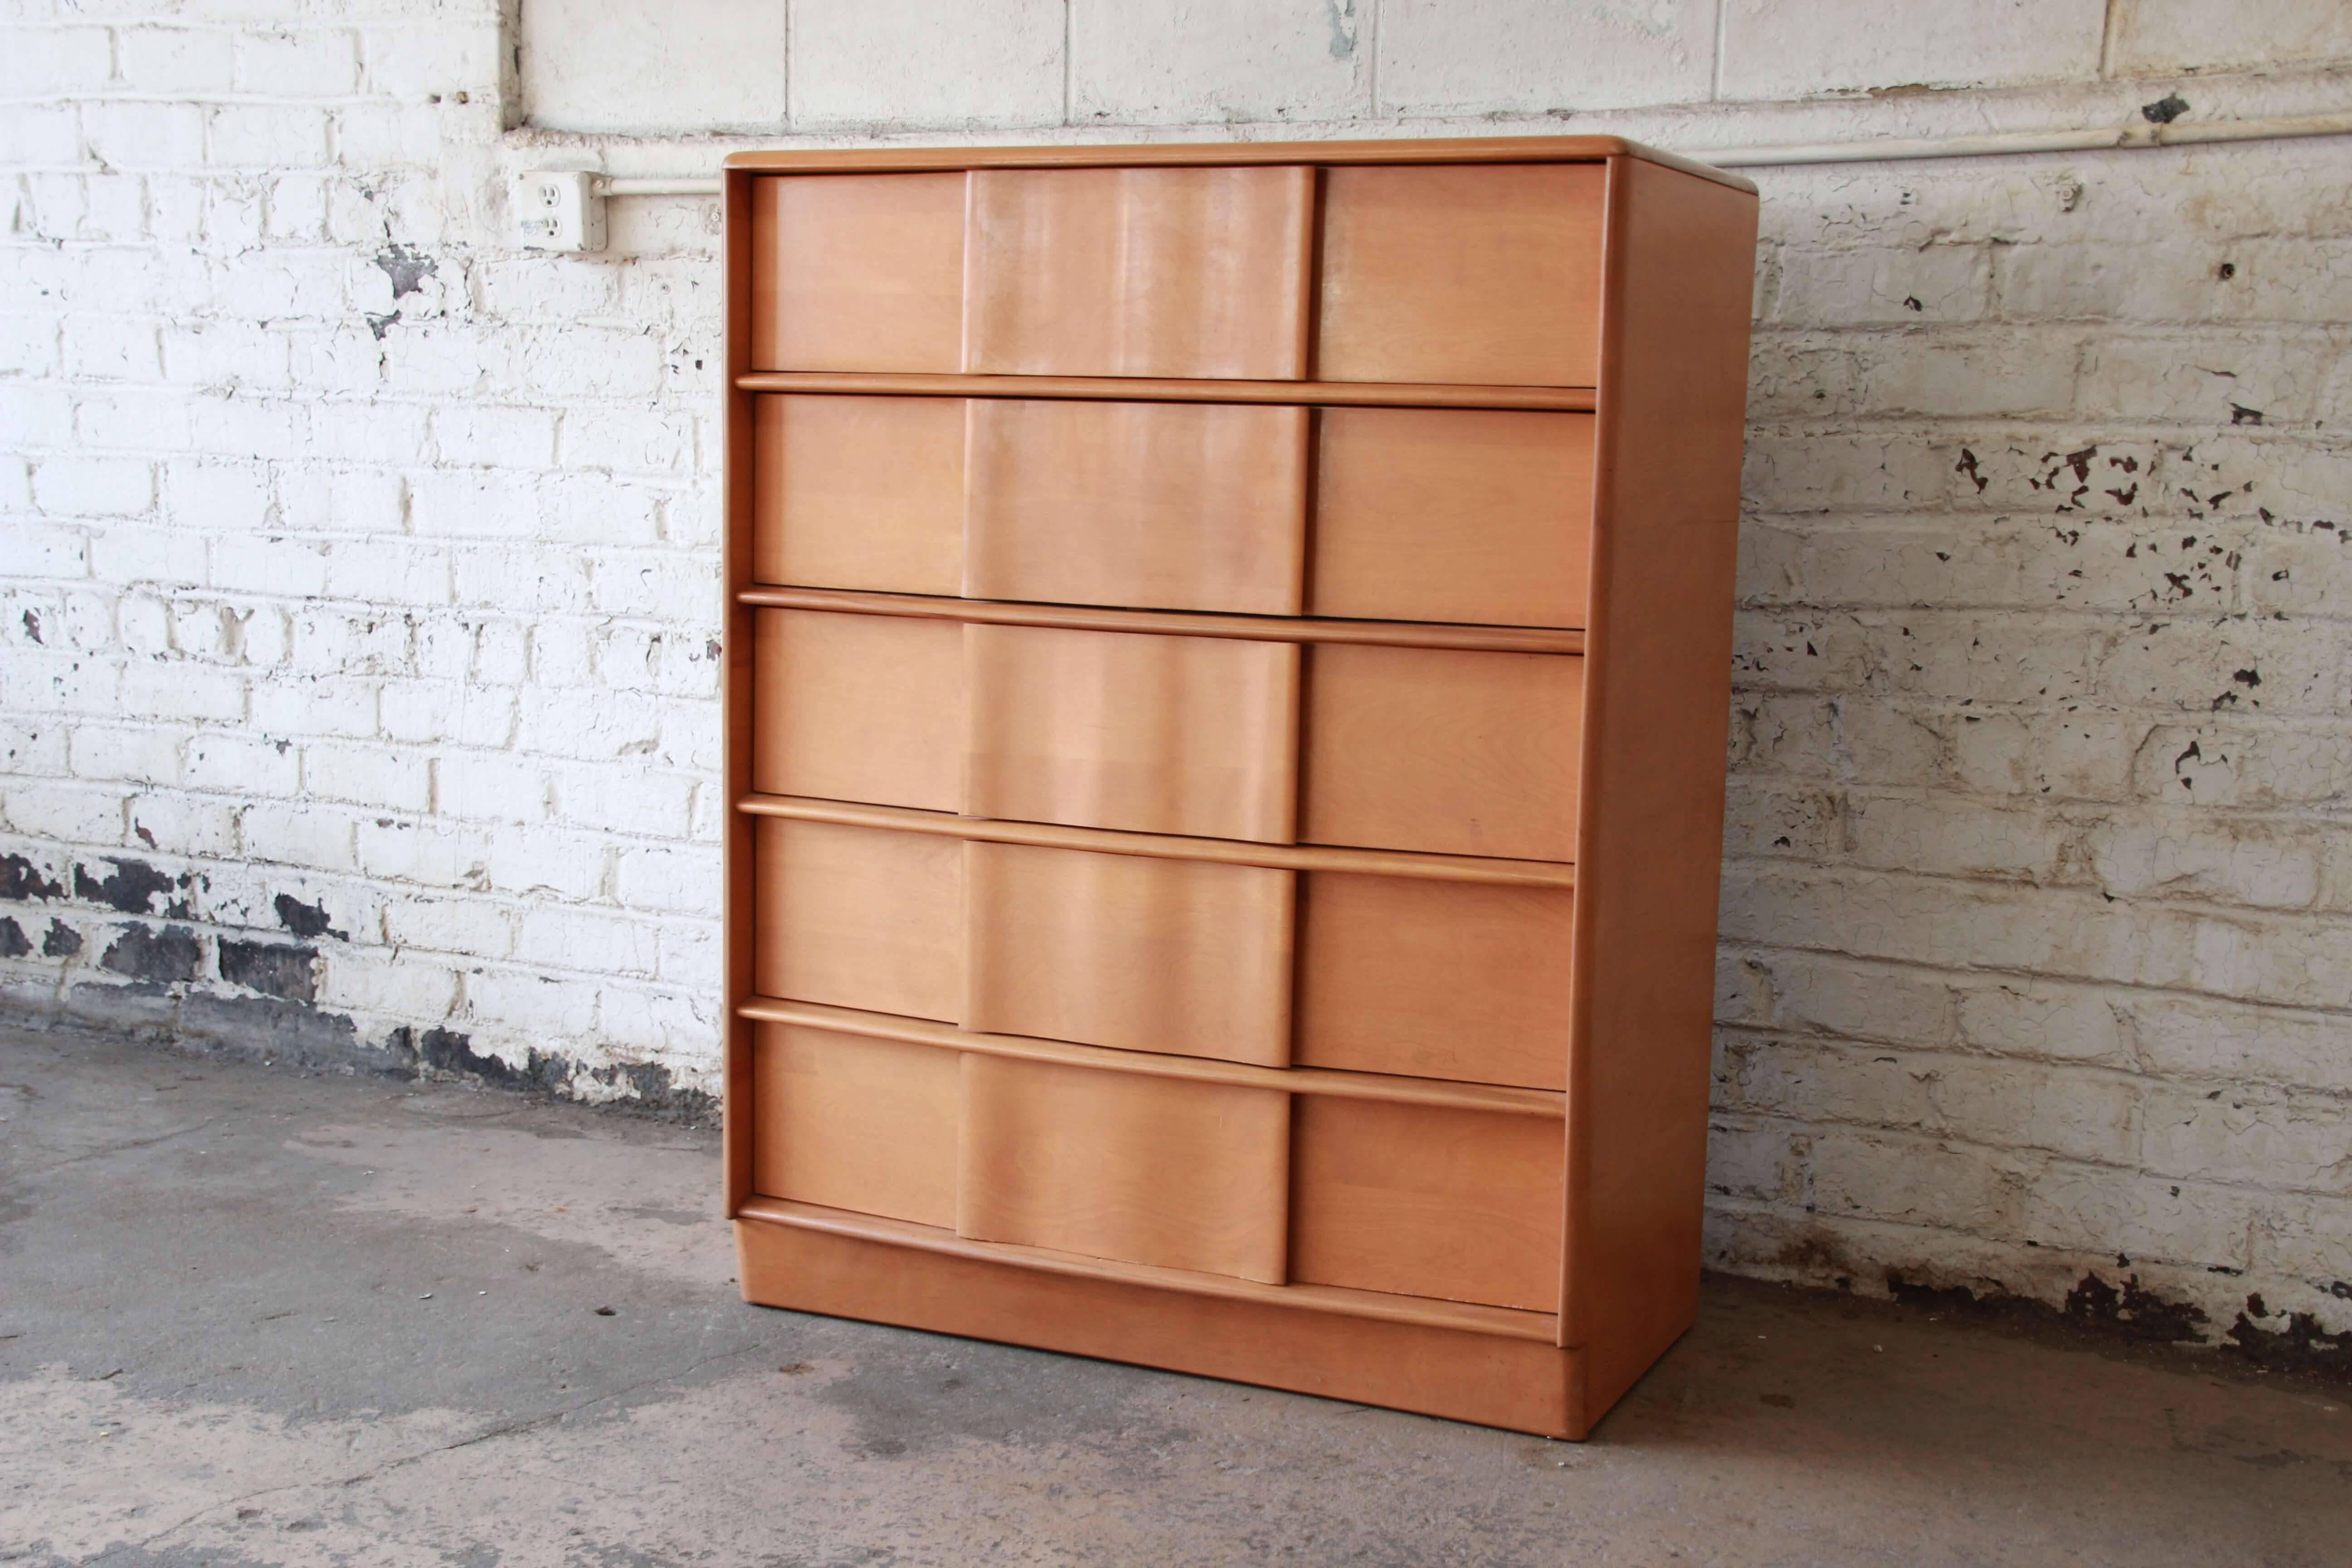 Offering a very nice Heywood-Wakefield Sculptura highboy dresser in champagne. This dresser has five smooth sliding drawers with sculpted pulls giving this a unique and defined modern style. It has a plinth base and is made from solid maple. The